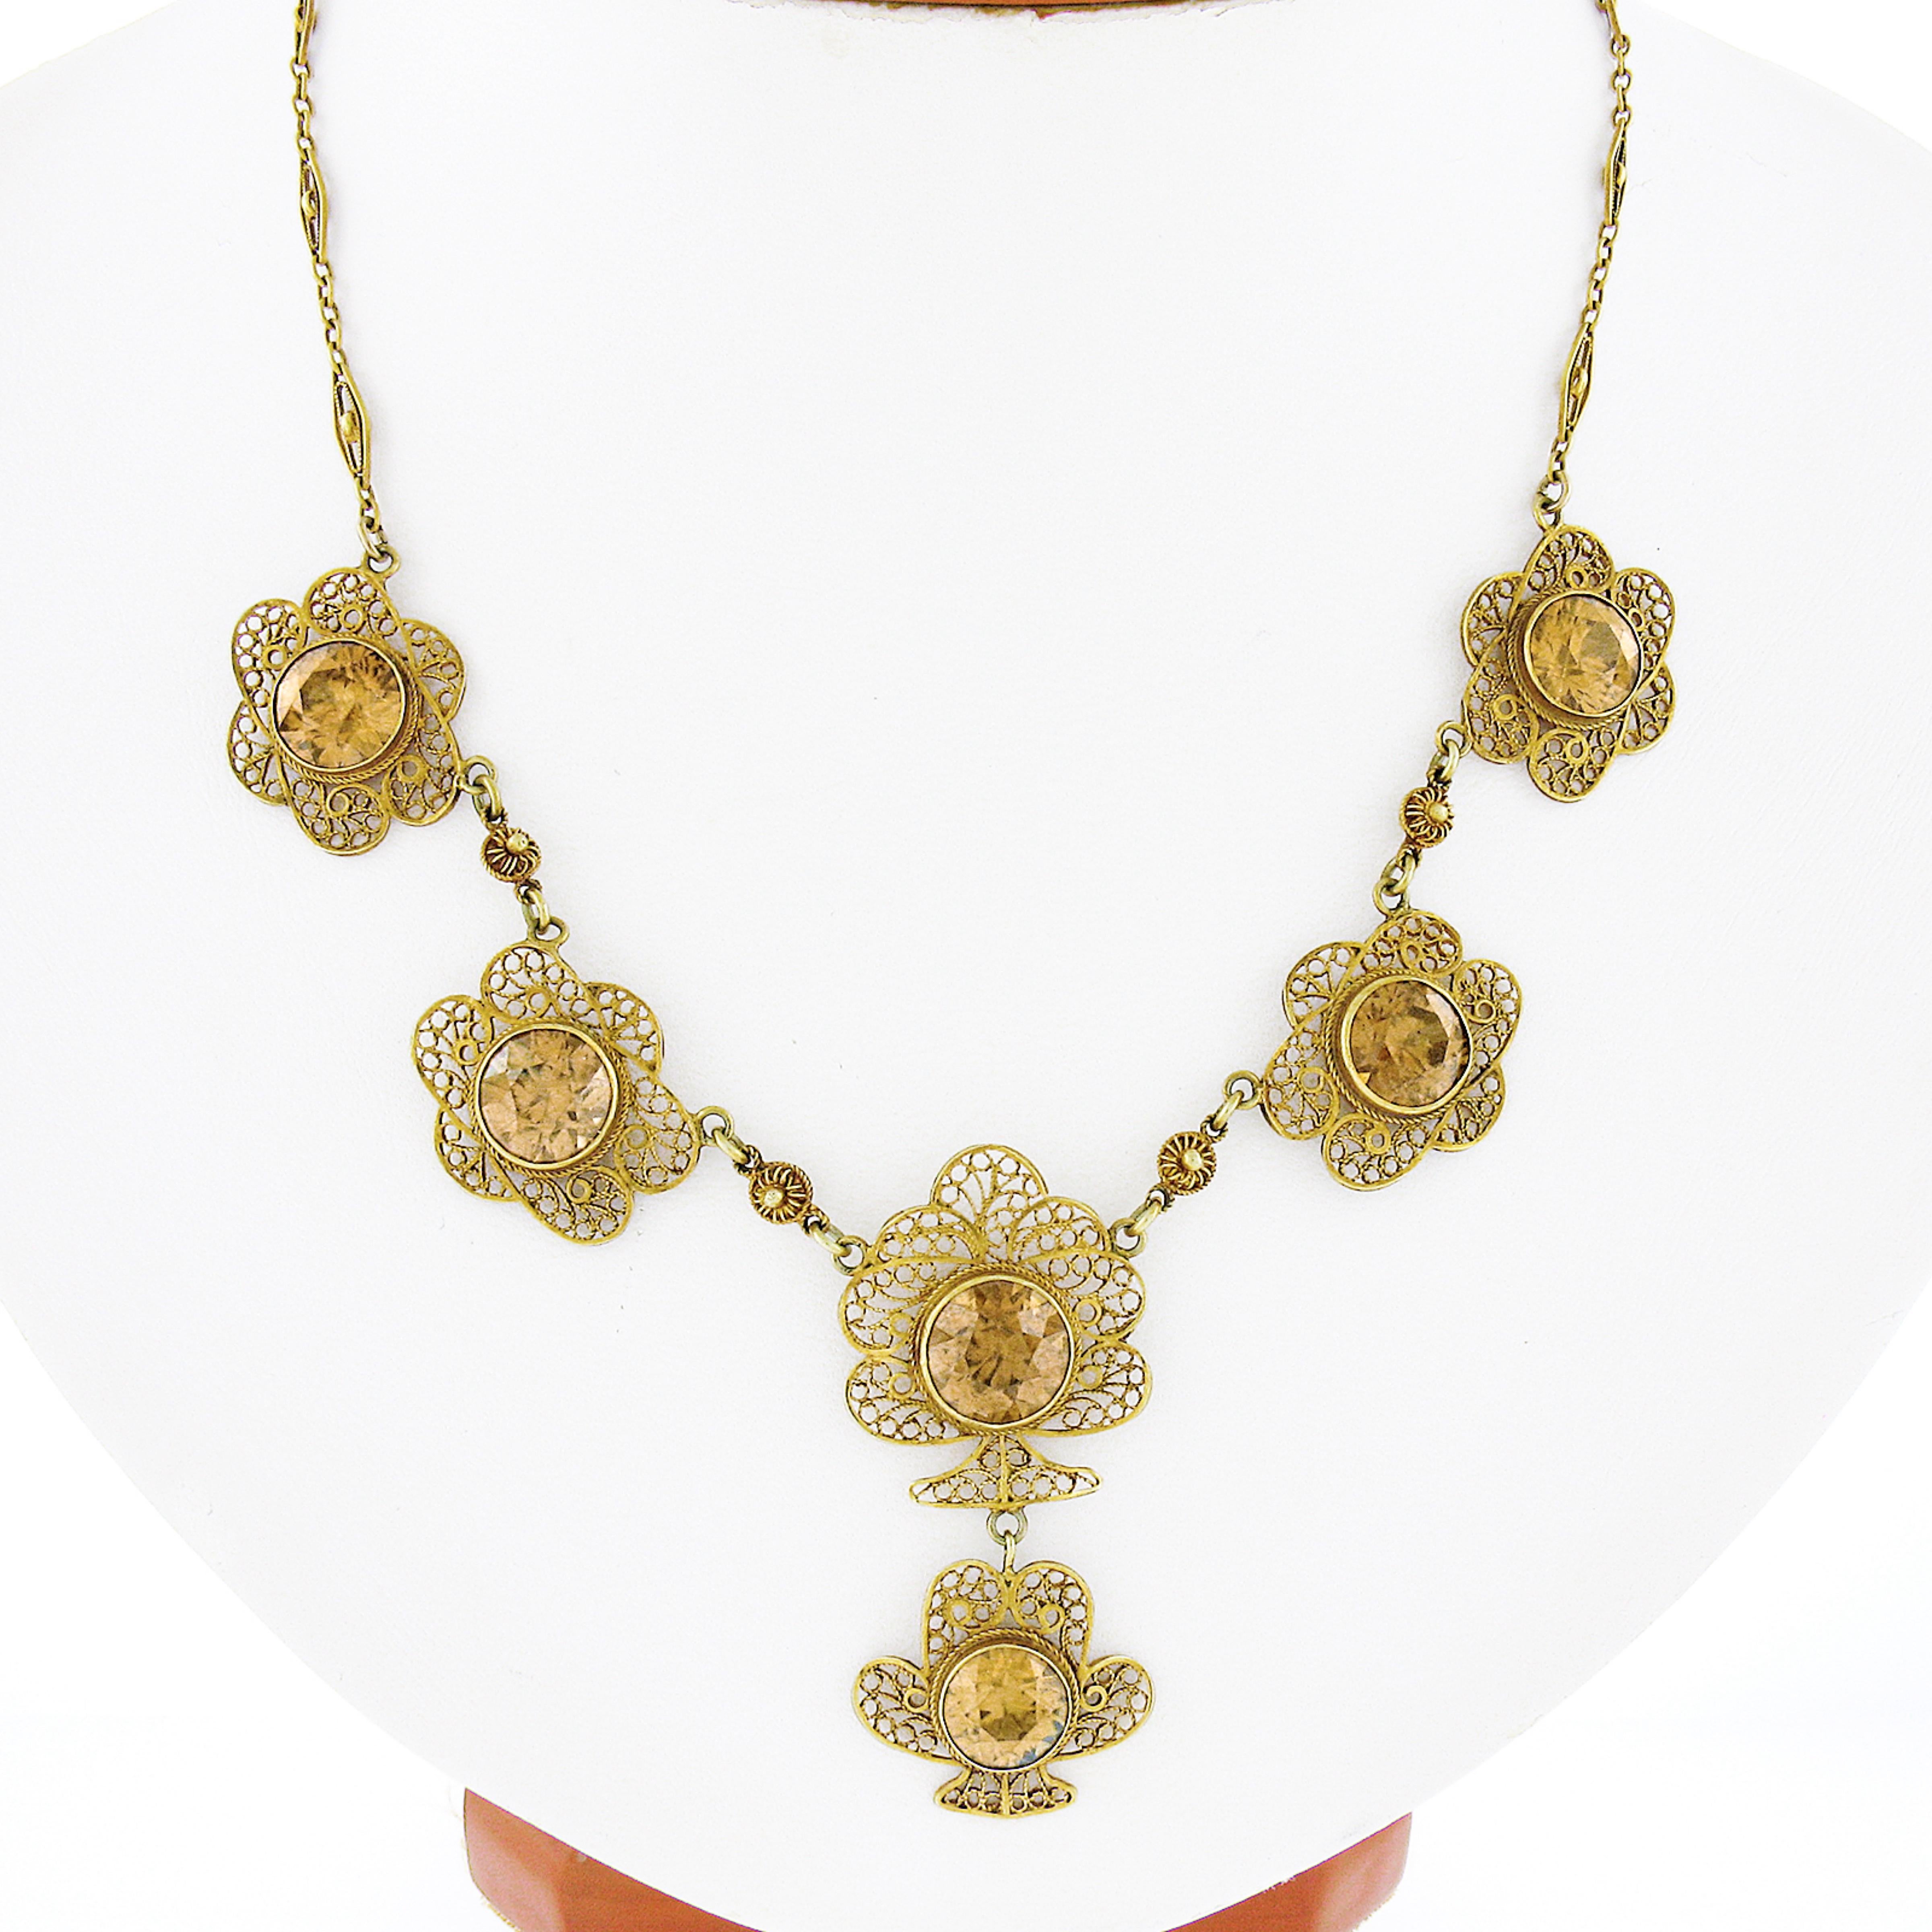 This magnificent and unique antique pendant necklace was crafted during the art nouveau period in solid 14k yellow gold. The center of the necklace features gorgeous open filigree work floral shaped links that are each bezel set with a fine quality